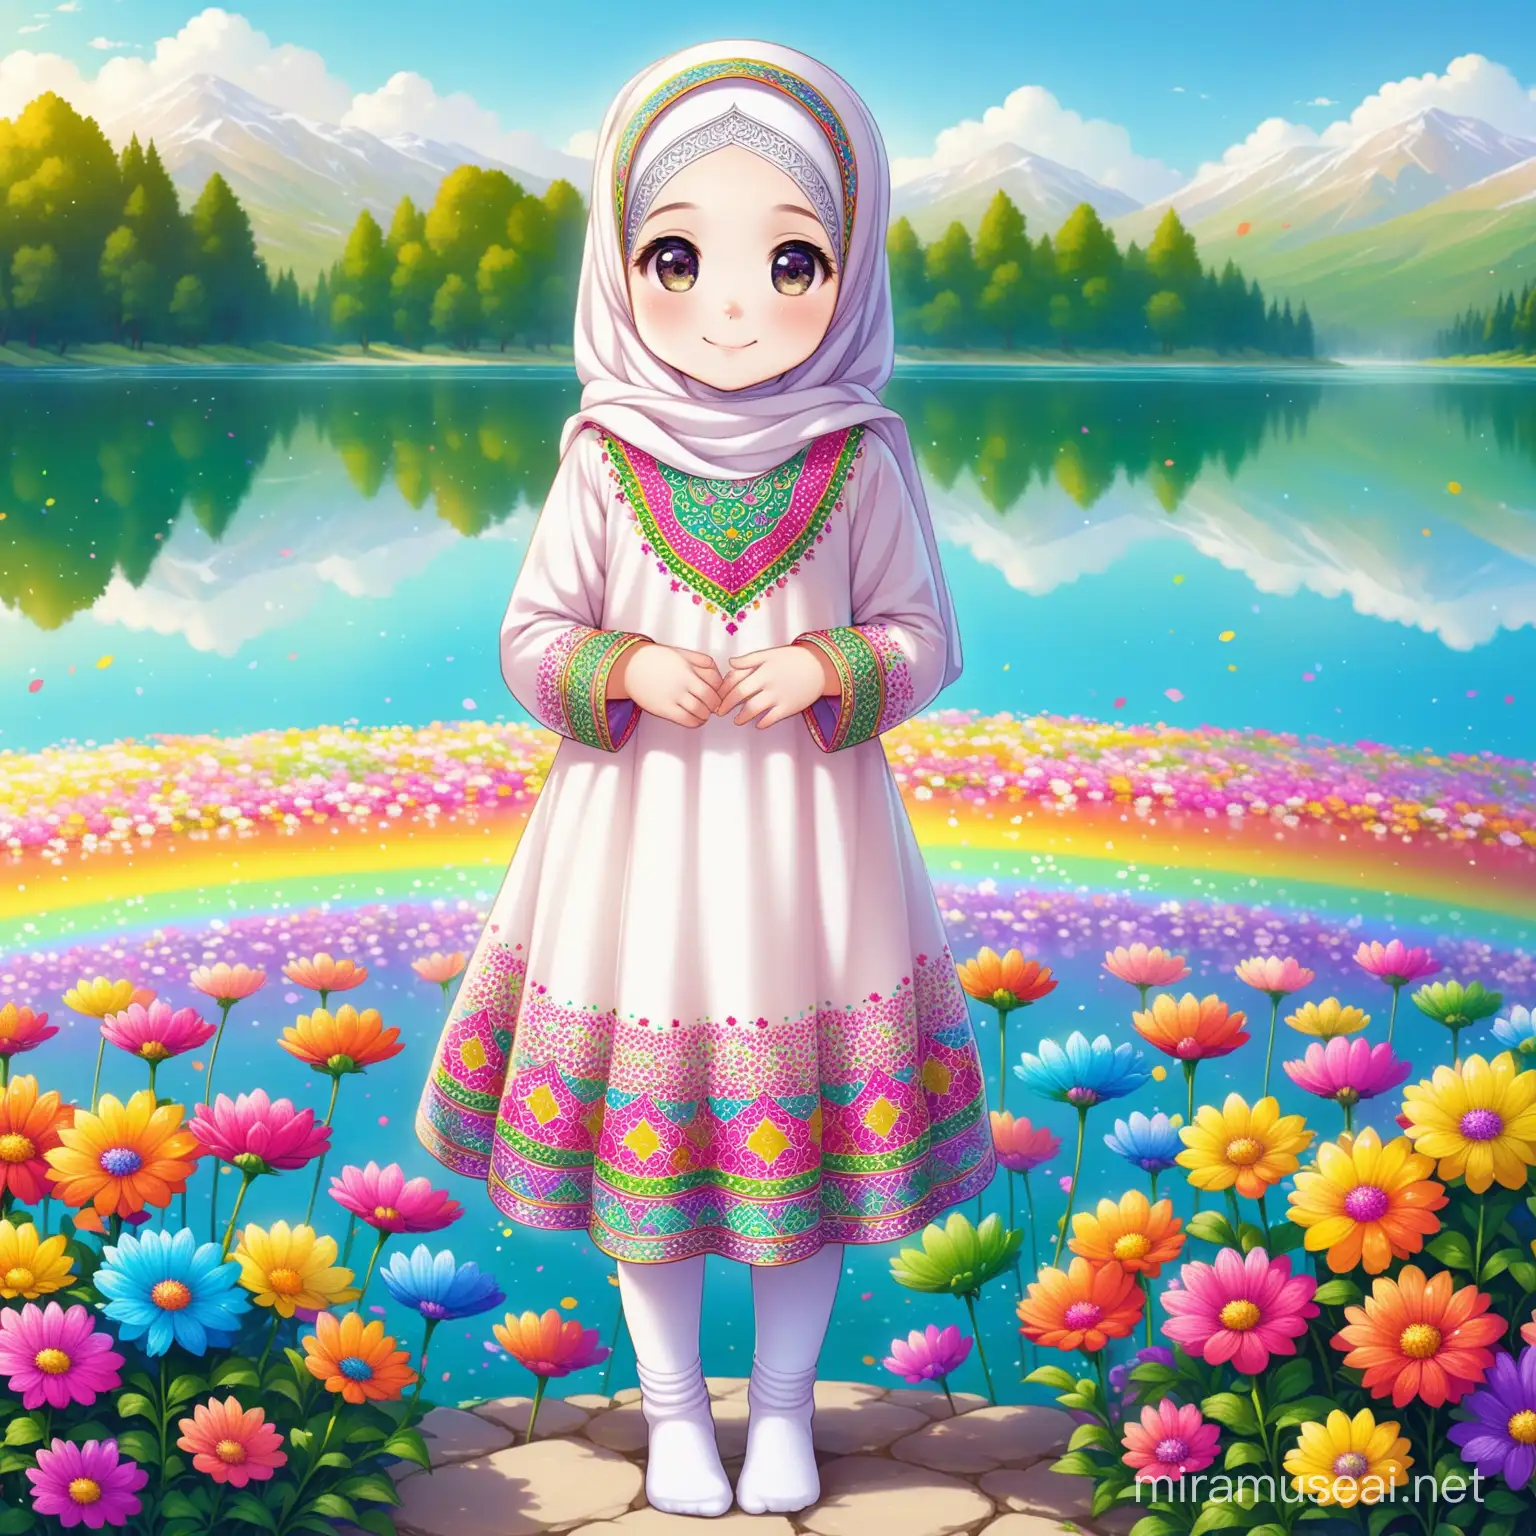 Persian little girl(full height, Muslim, with emphasis no hair out of veil(Hijab), small eyes, bigger nose, white skin, cute, smiling, wearing socks, clothes full of Persian designs).
Atmosphere full of many rainbow flowers, lake, paring.